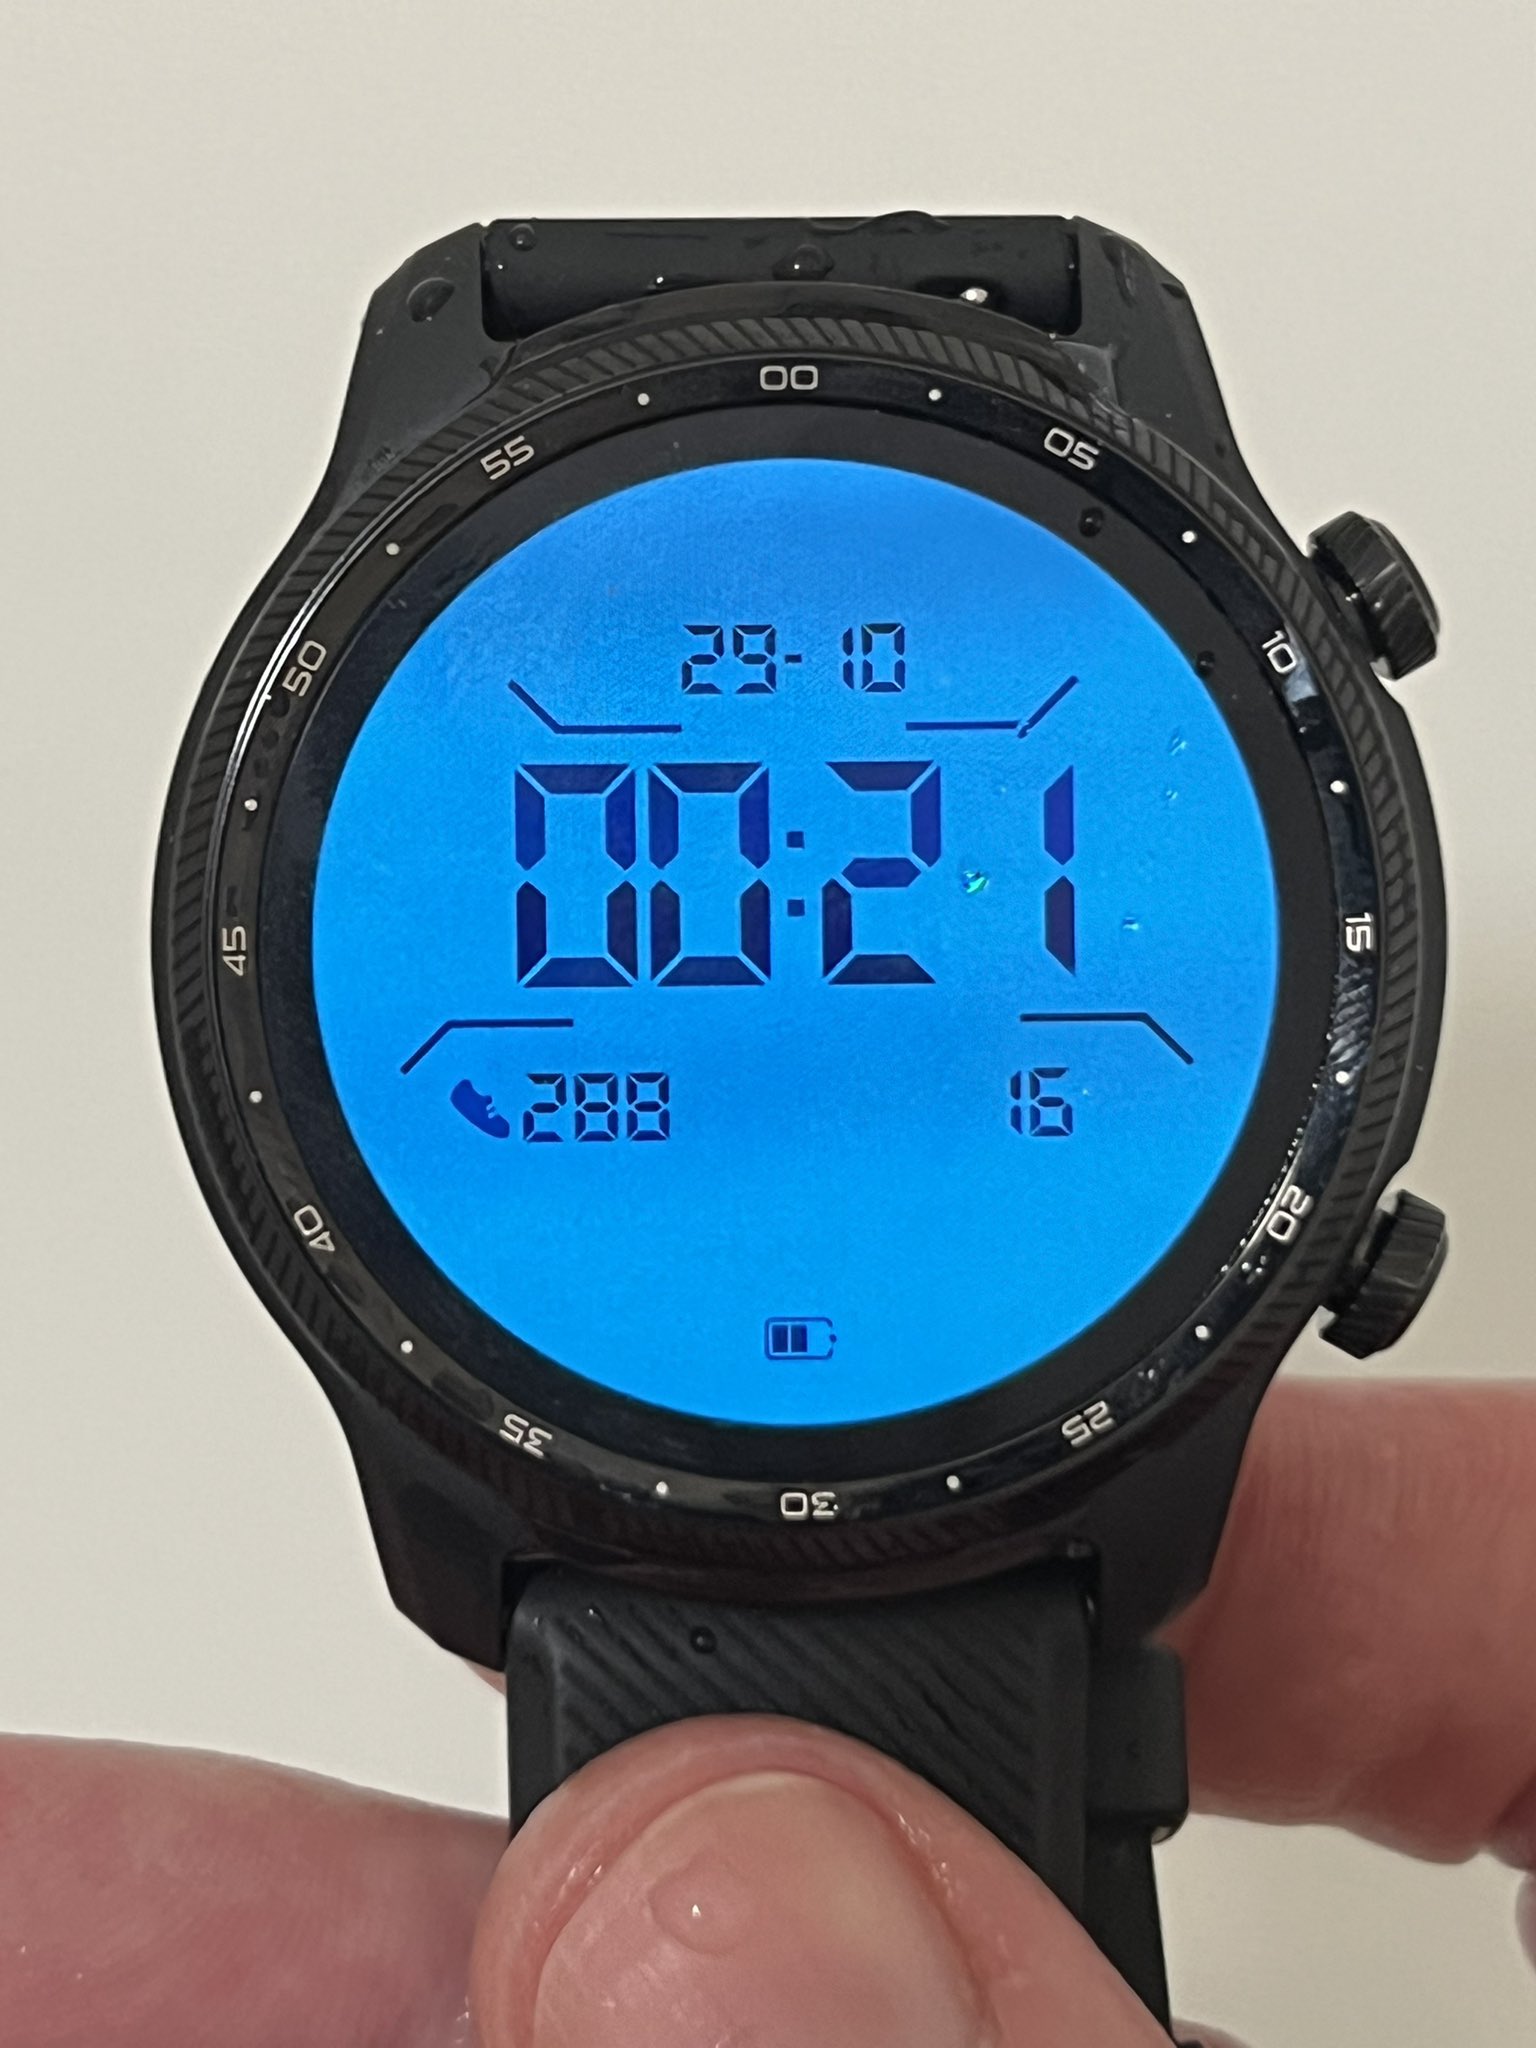 Mobvoi TicWatch Pro 3 Ultra GPS Smartwatch (Review)